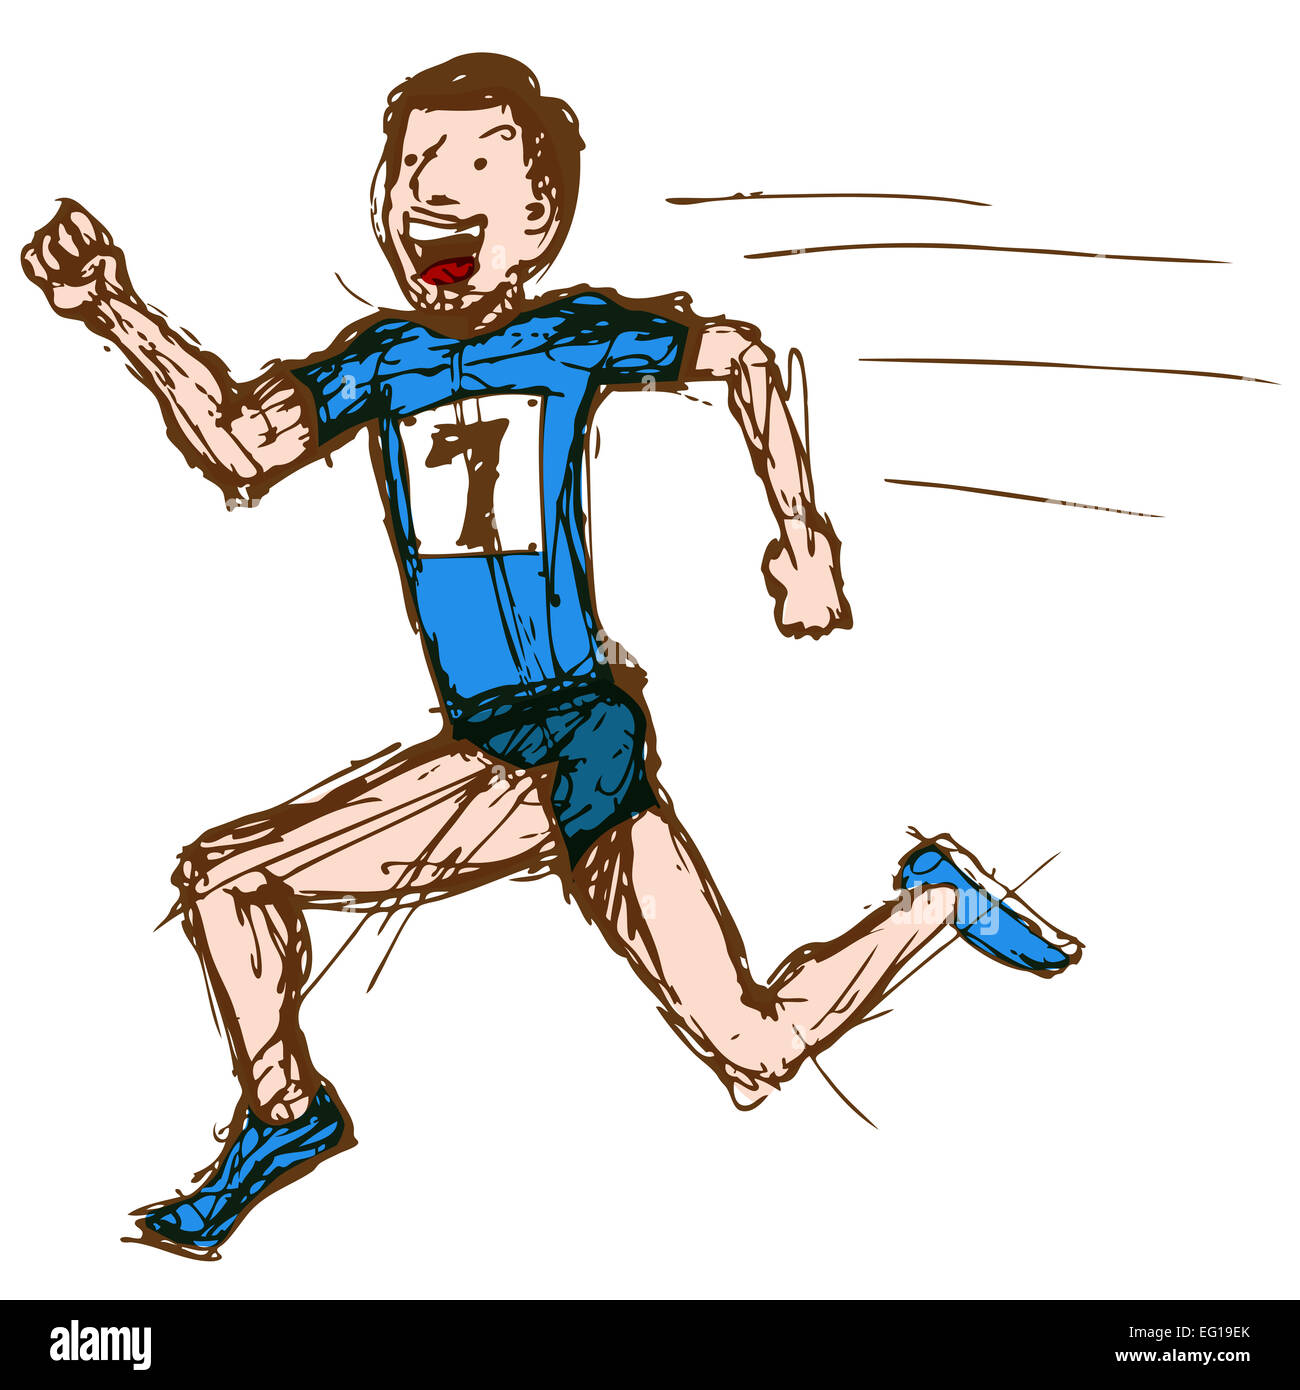 An image of sketch drawing of a male runner Stock Photo - Alamy